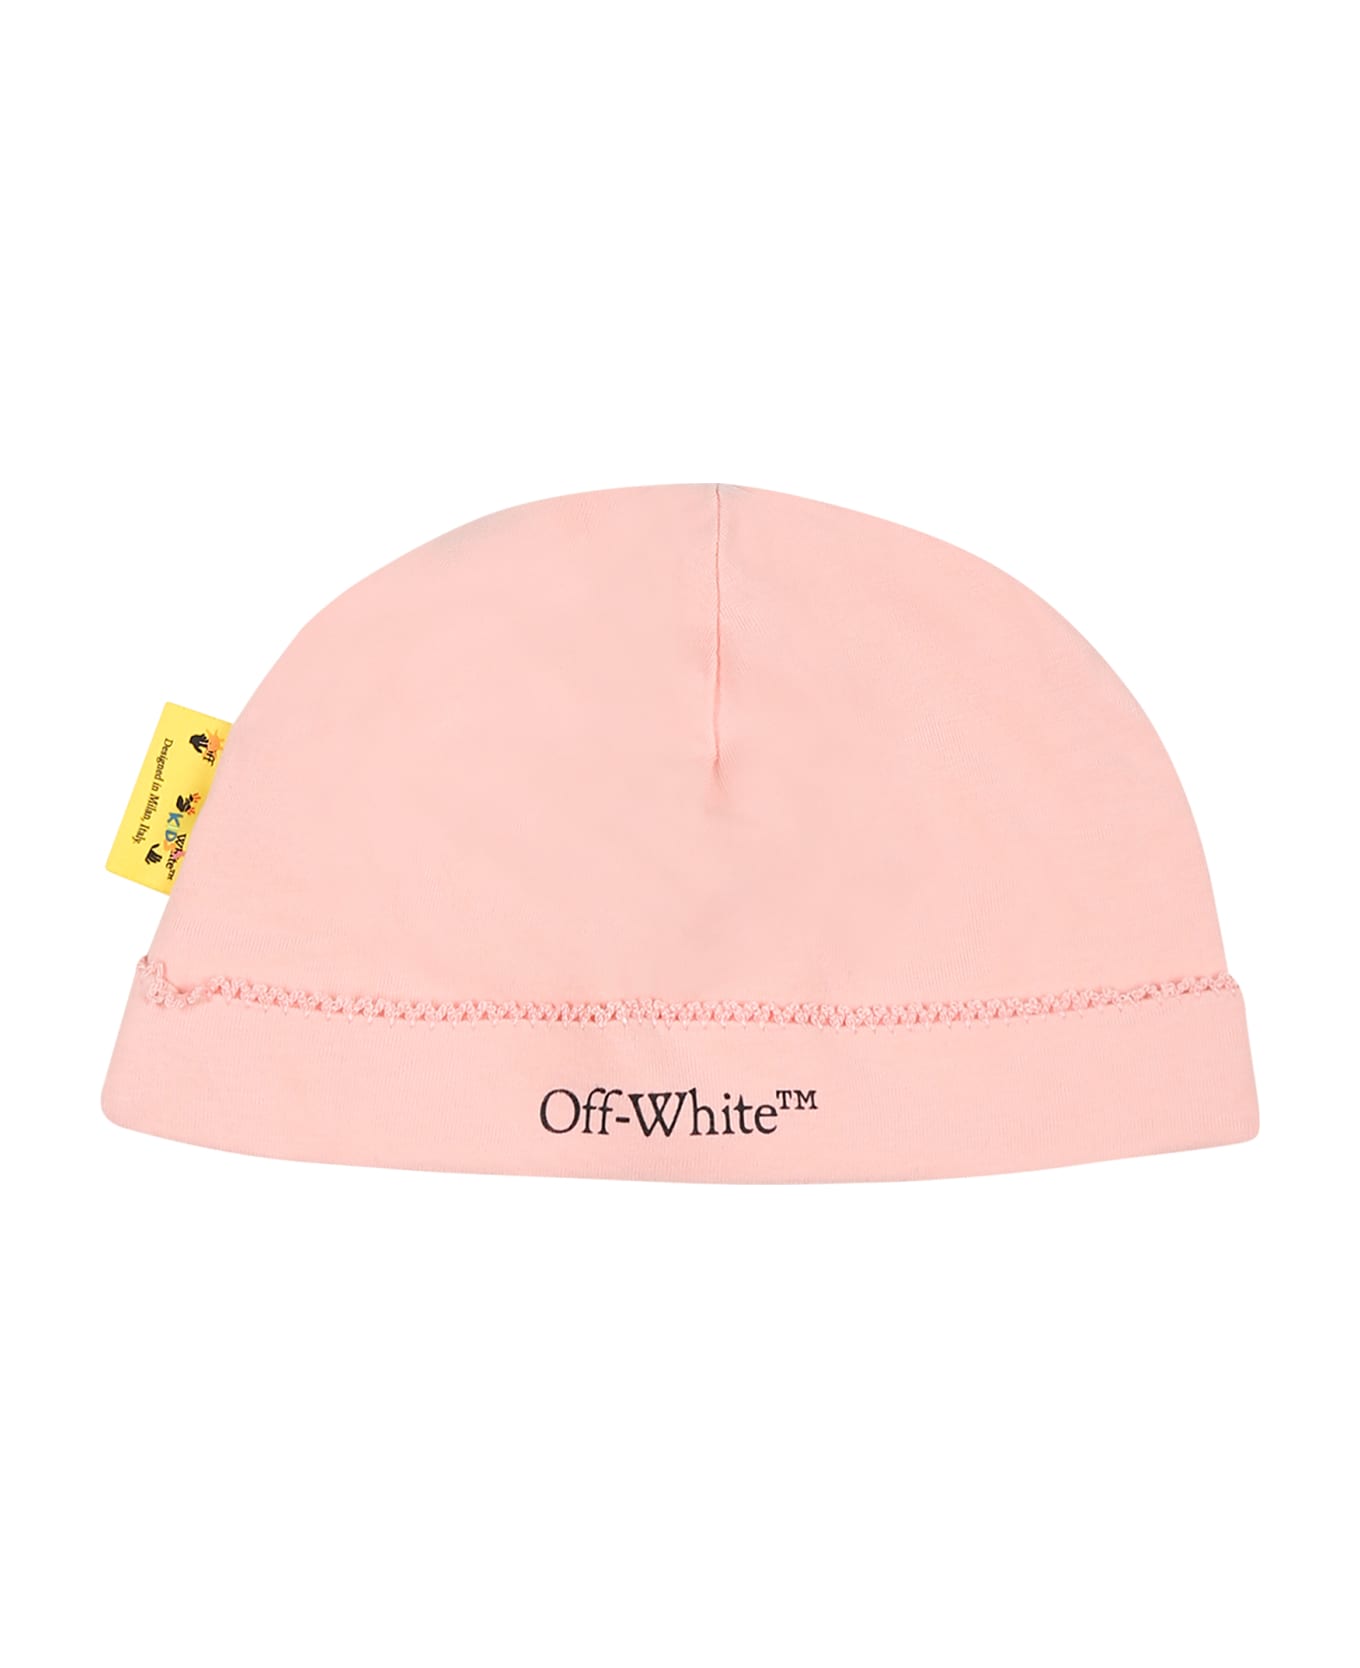 Off-White Pink Set For Baby Boy - Pink